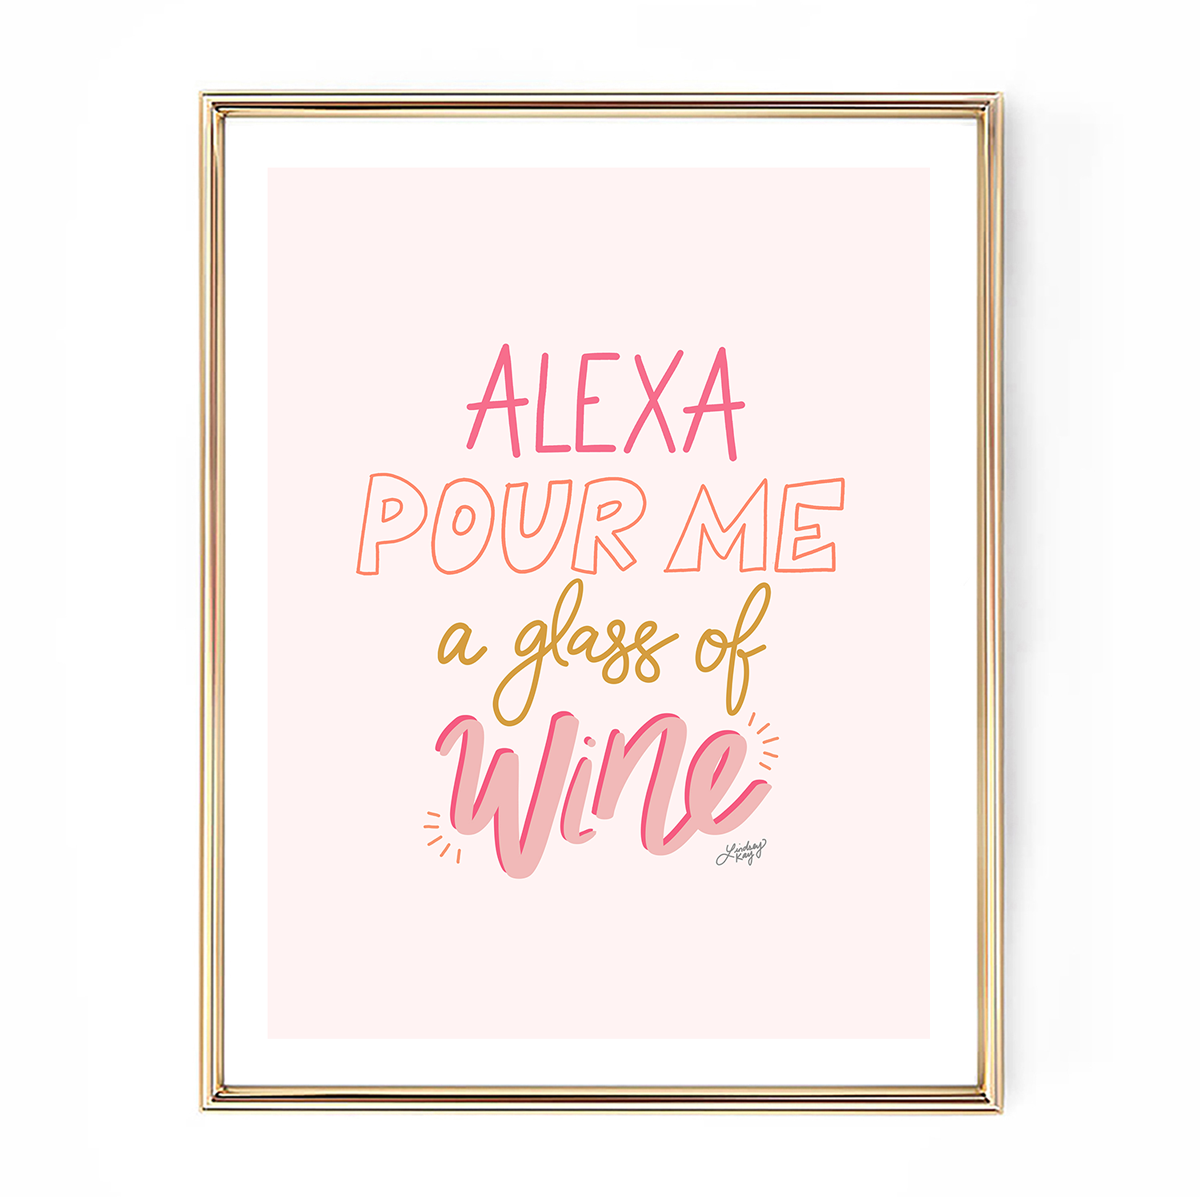 alexa pour me a glass of wine art print poster funny girly bar cart dorm room gift lindsey kay collective